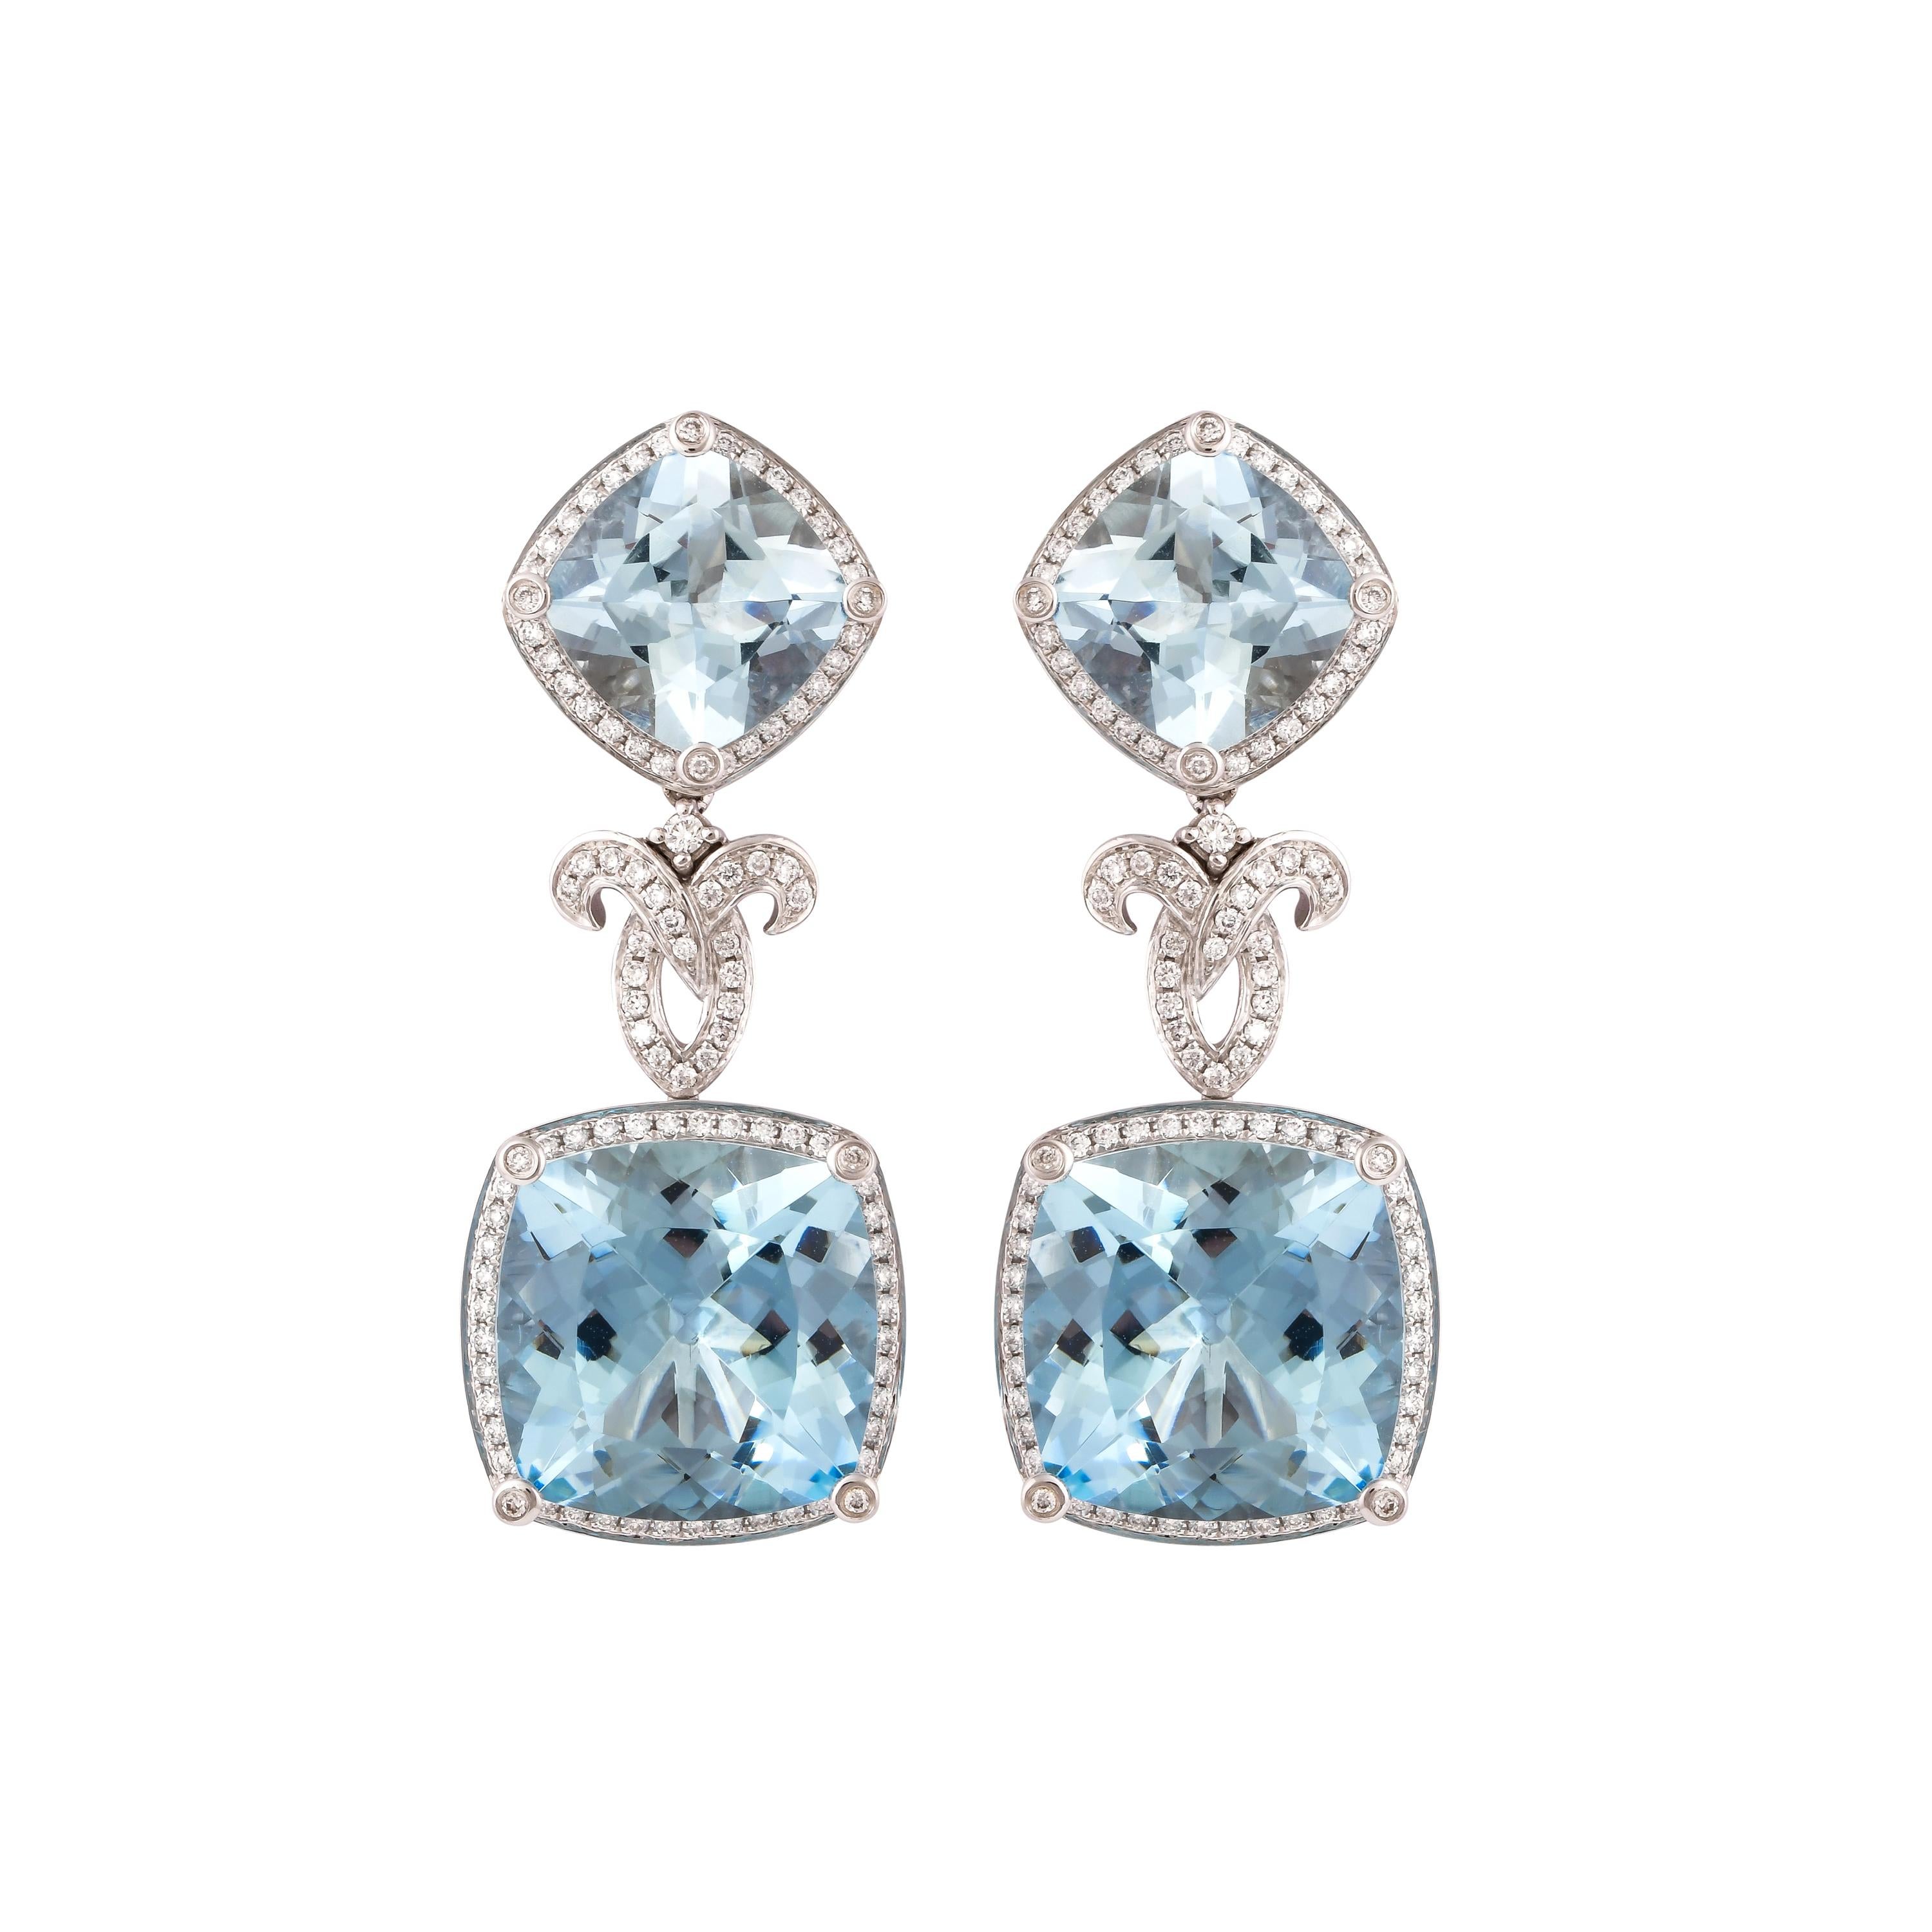 An exclusive collection of designer and unique dangle earrings by Sunita Nahata Fine Design. 

Aquamarine Dangle Earring in 14 Karat White Gold.

Aquamarine: 20.08 carat, 14X14 Size, Cushion Shape.
Aquamarine: 7.21 carat, 10X10 Size, Cushion